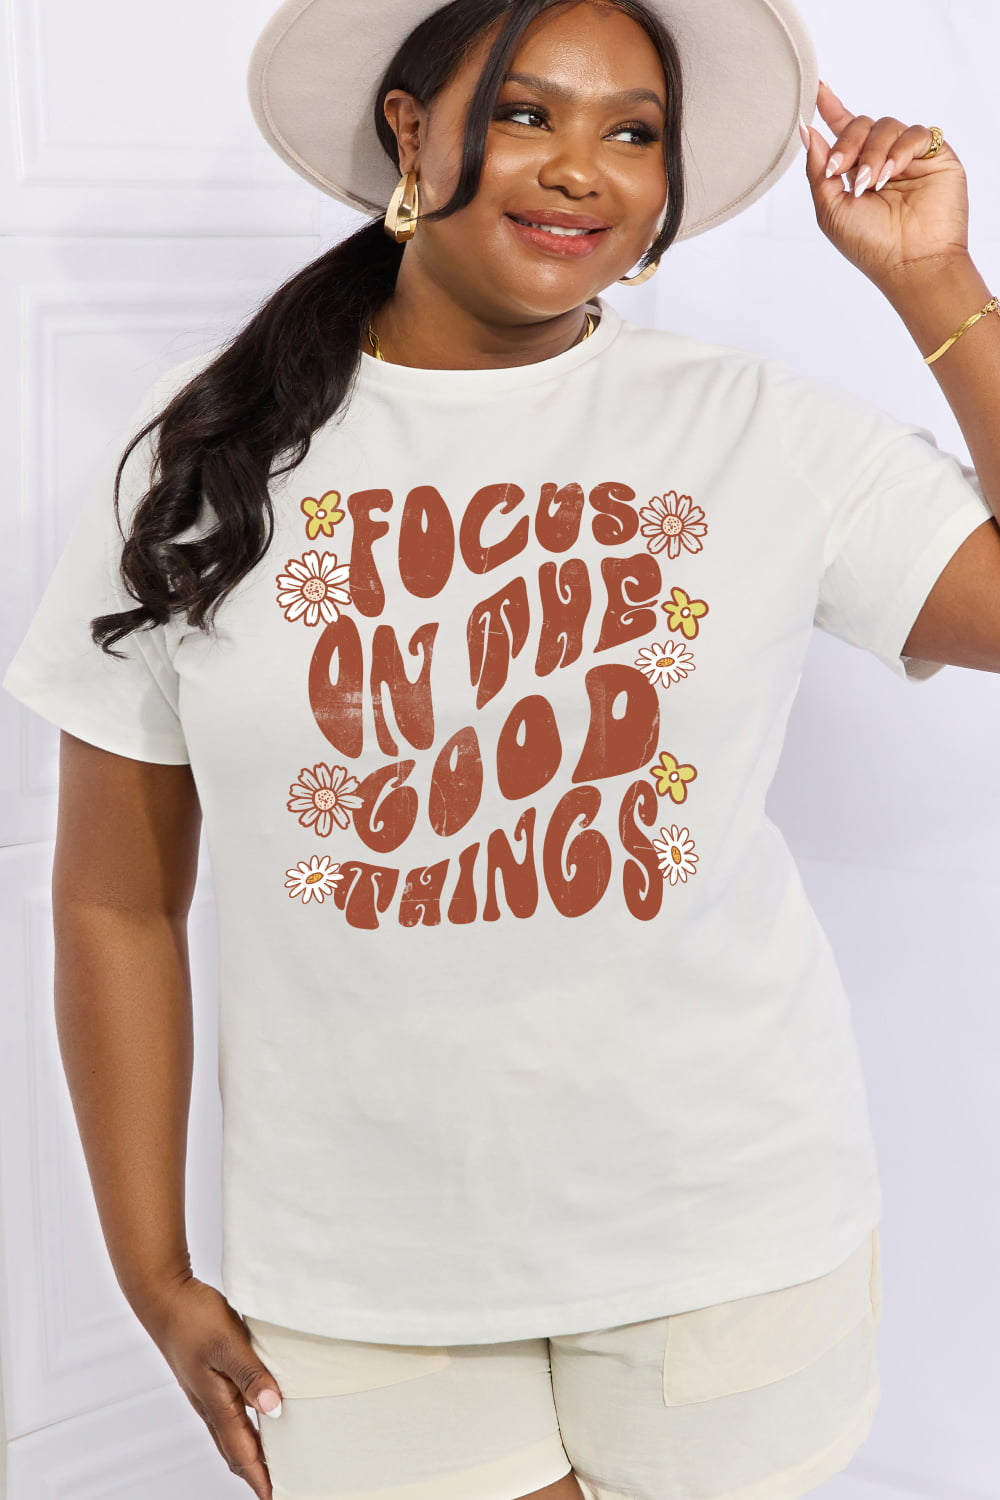 FOCUS ON THE GOOD THINGS Graphic Cotton Tee - T-Shirts - Shirts & Tops - 4 - 2024